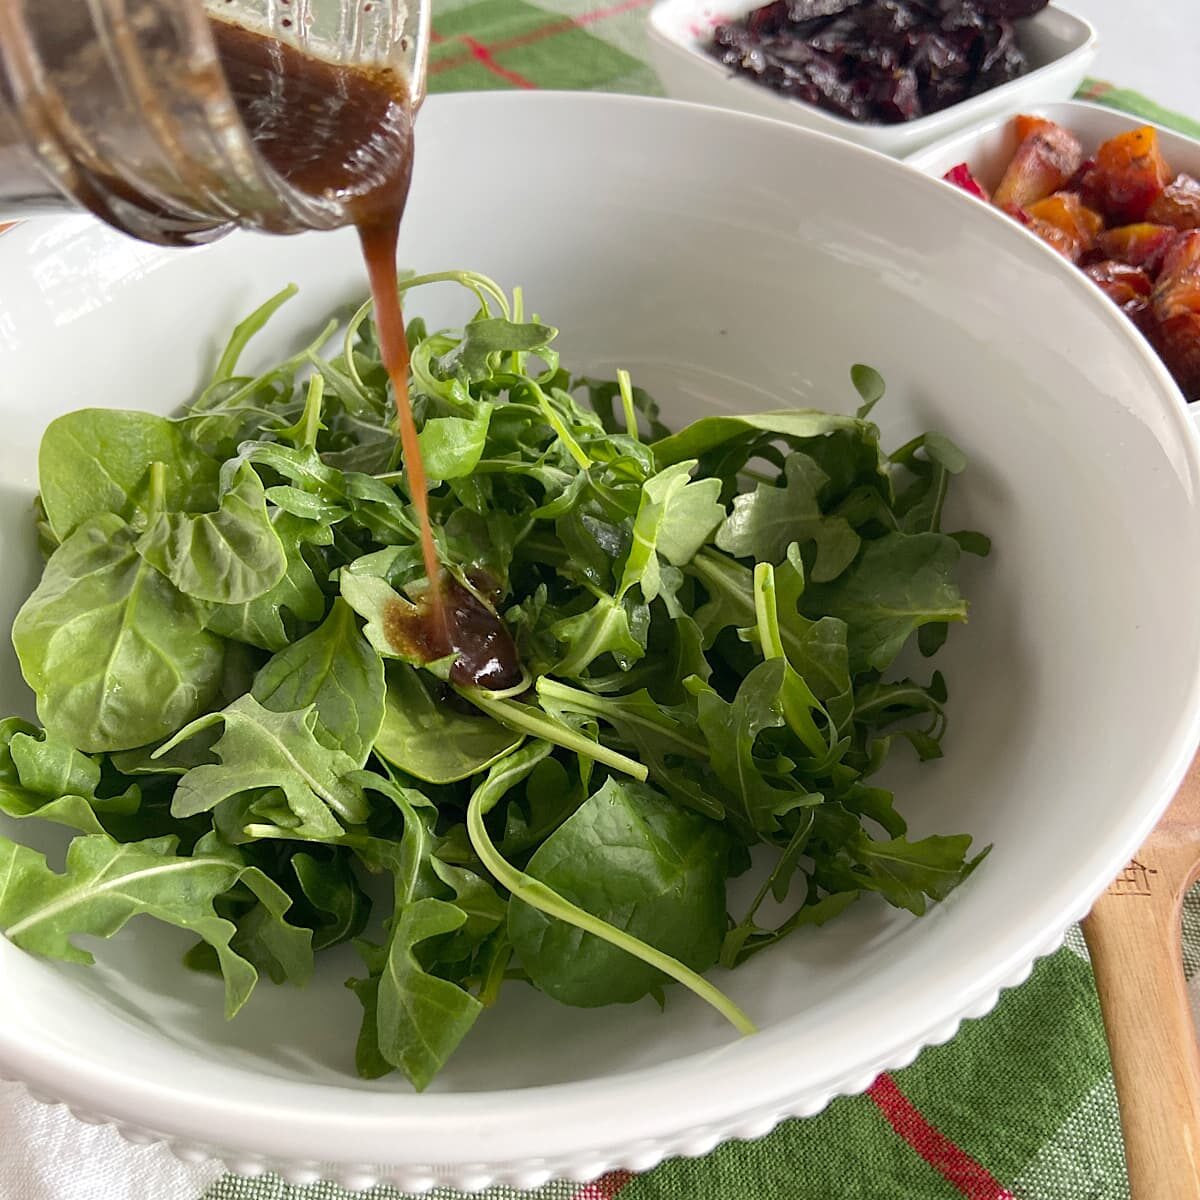 Drizzle greens with dressing